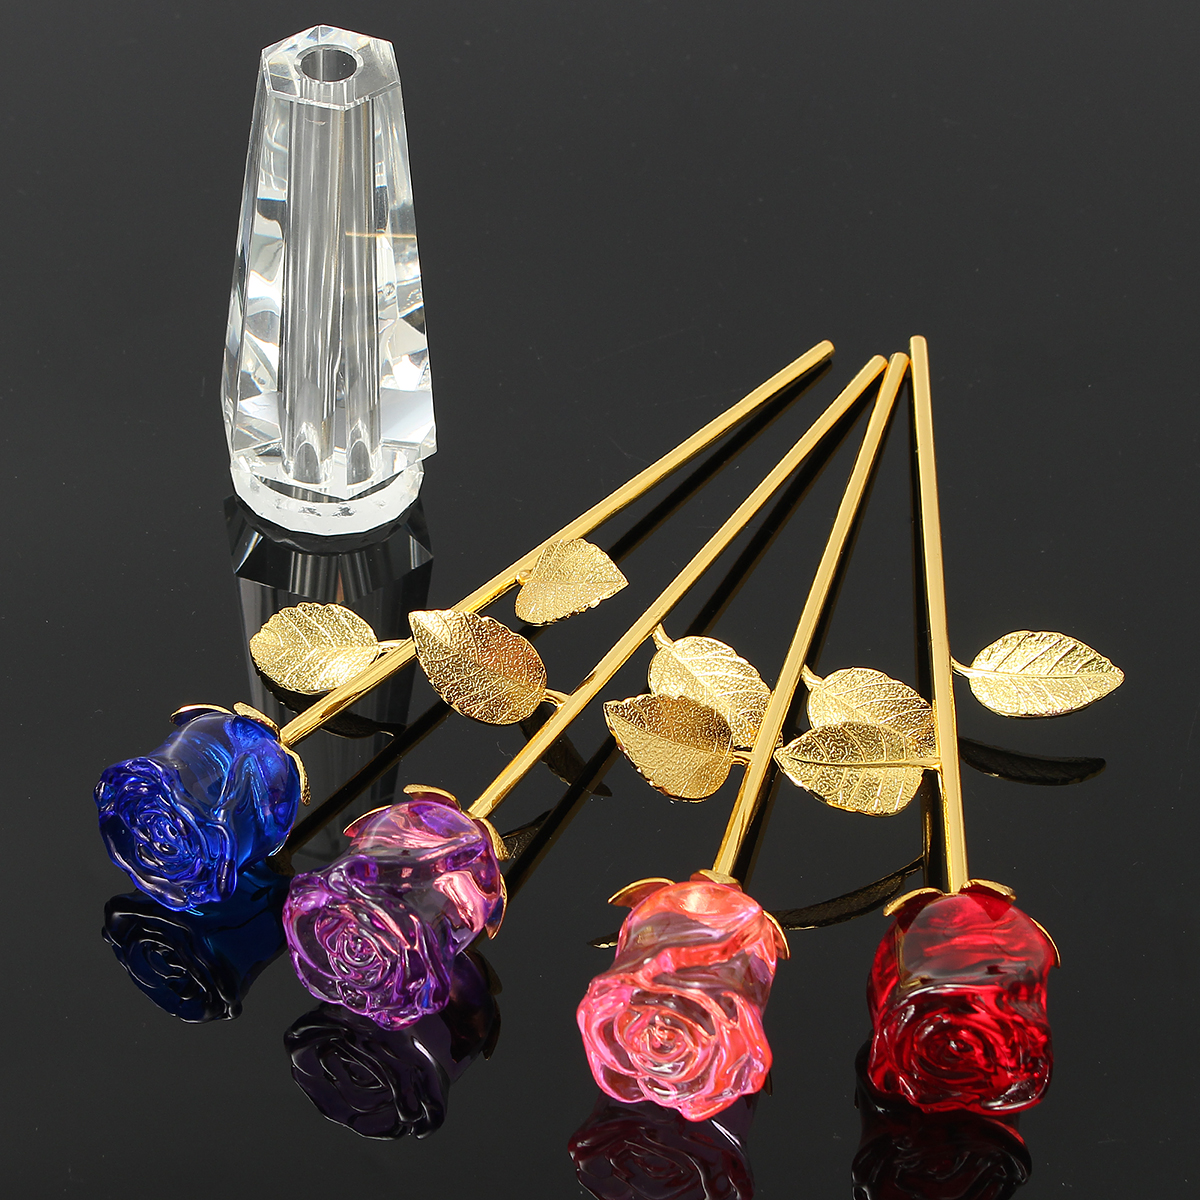 Crystal-Glass-Golden-Roses-Flower-Ornament-Valentine-Gifts-Present-with-Box-Home-Decorations-1430314-4